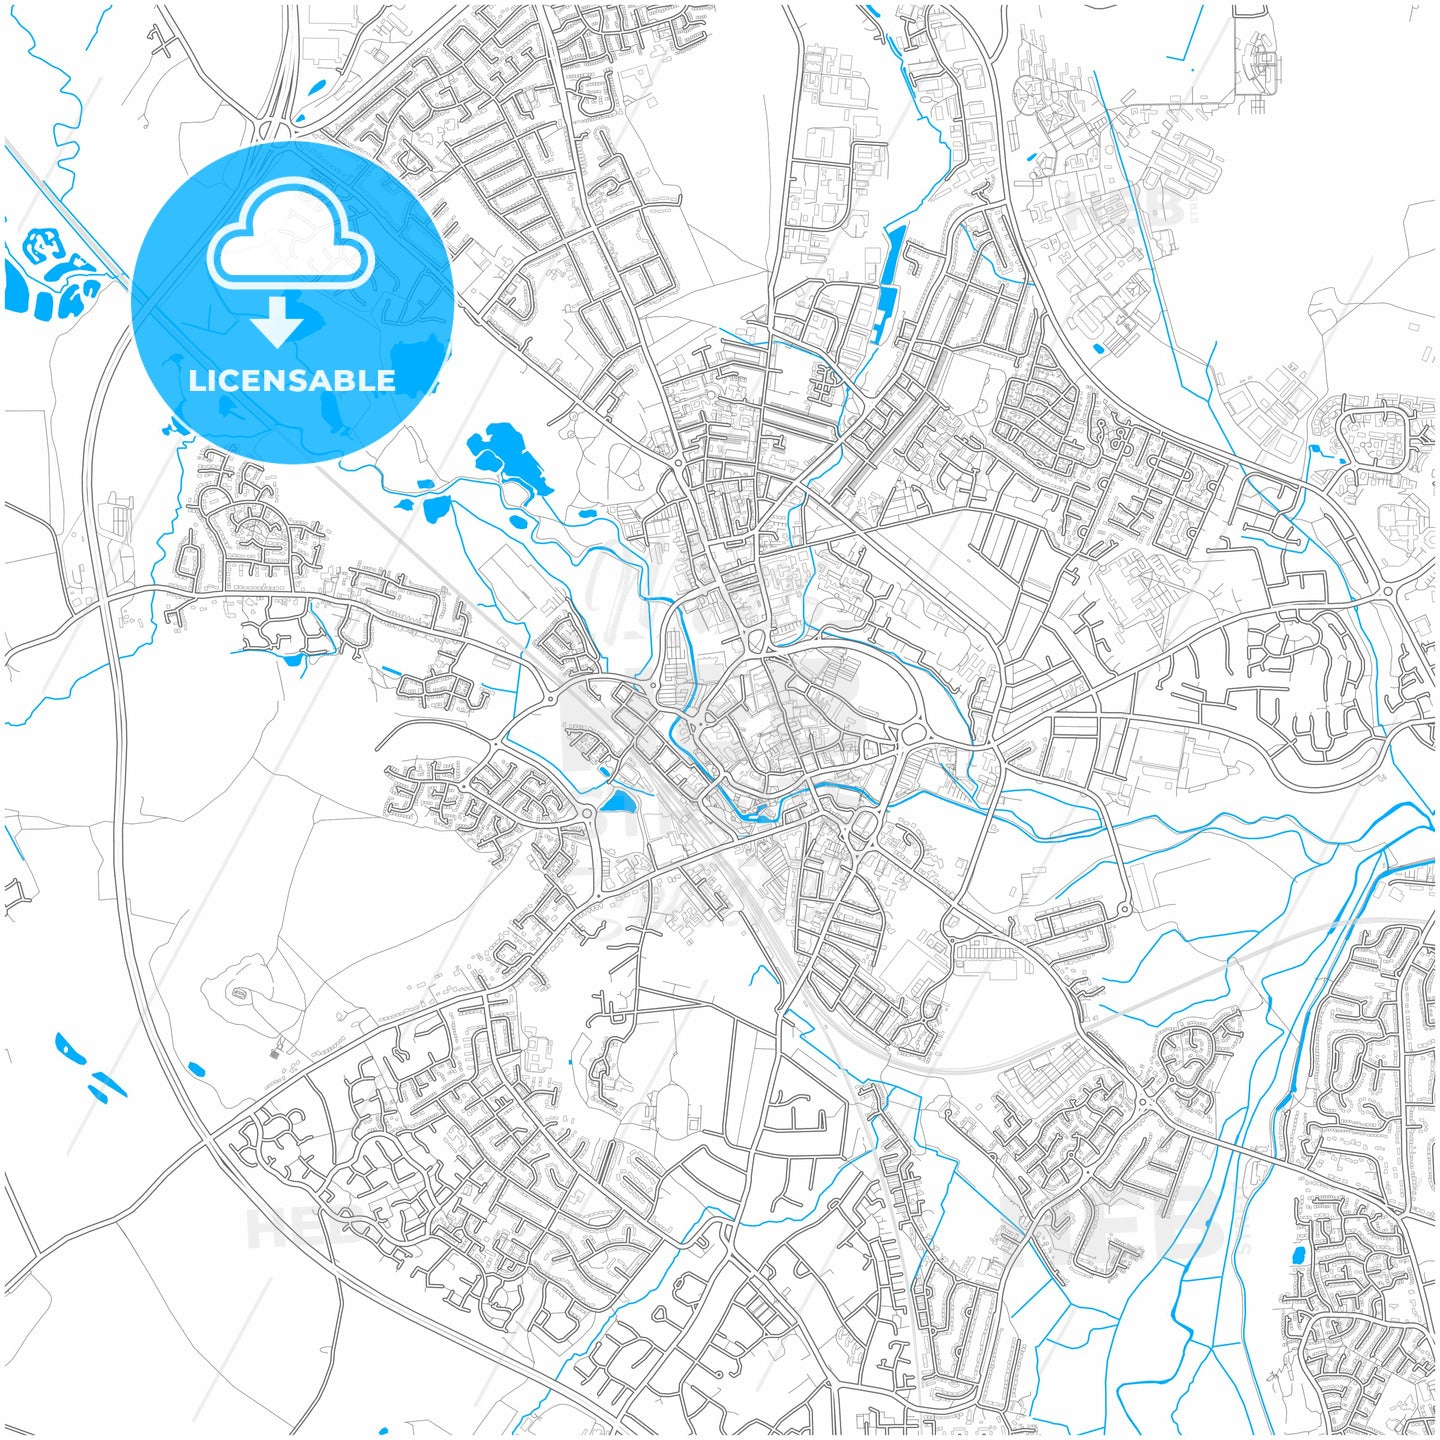 Stafford, West Midlands, England, city map with high quality roads.